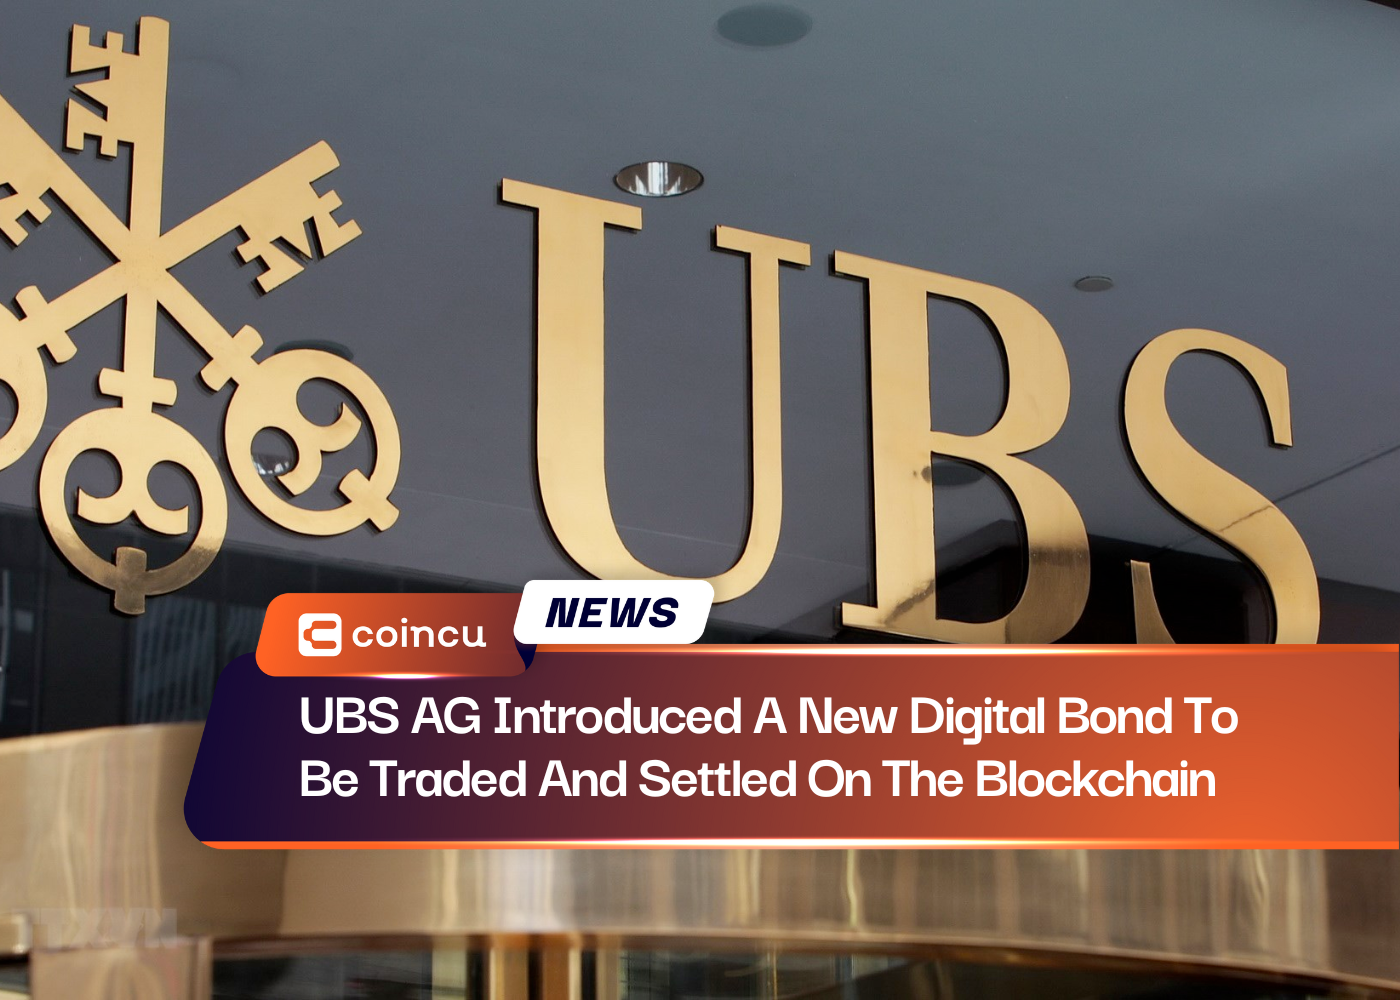 UBS AG Introduced A New Digital Bond To Be Traded And Settled On The Blockchain